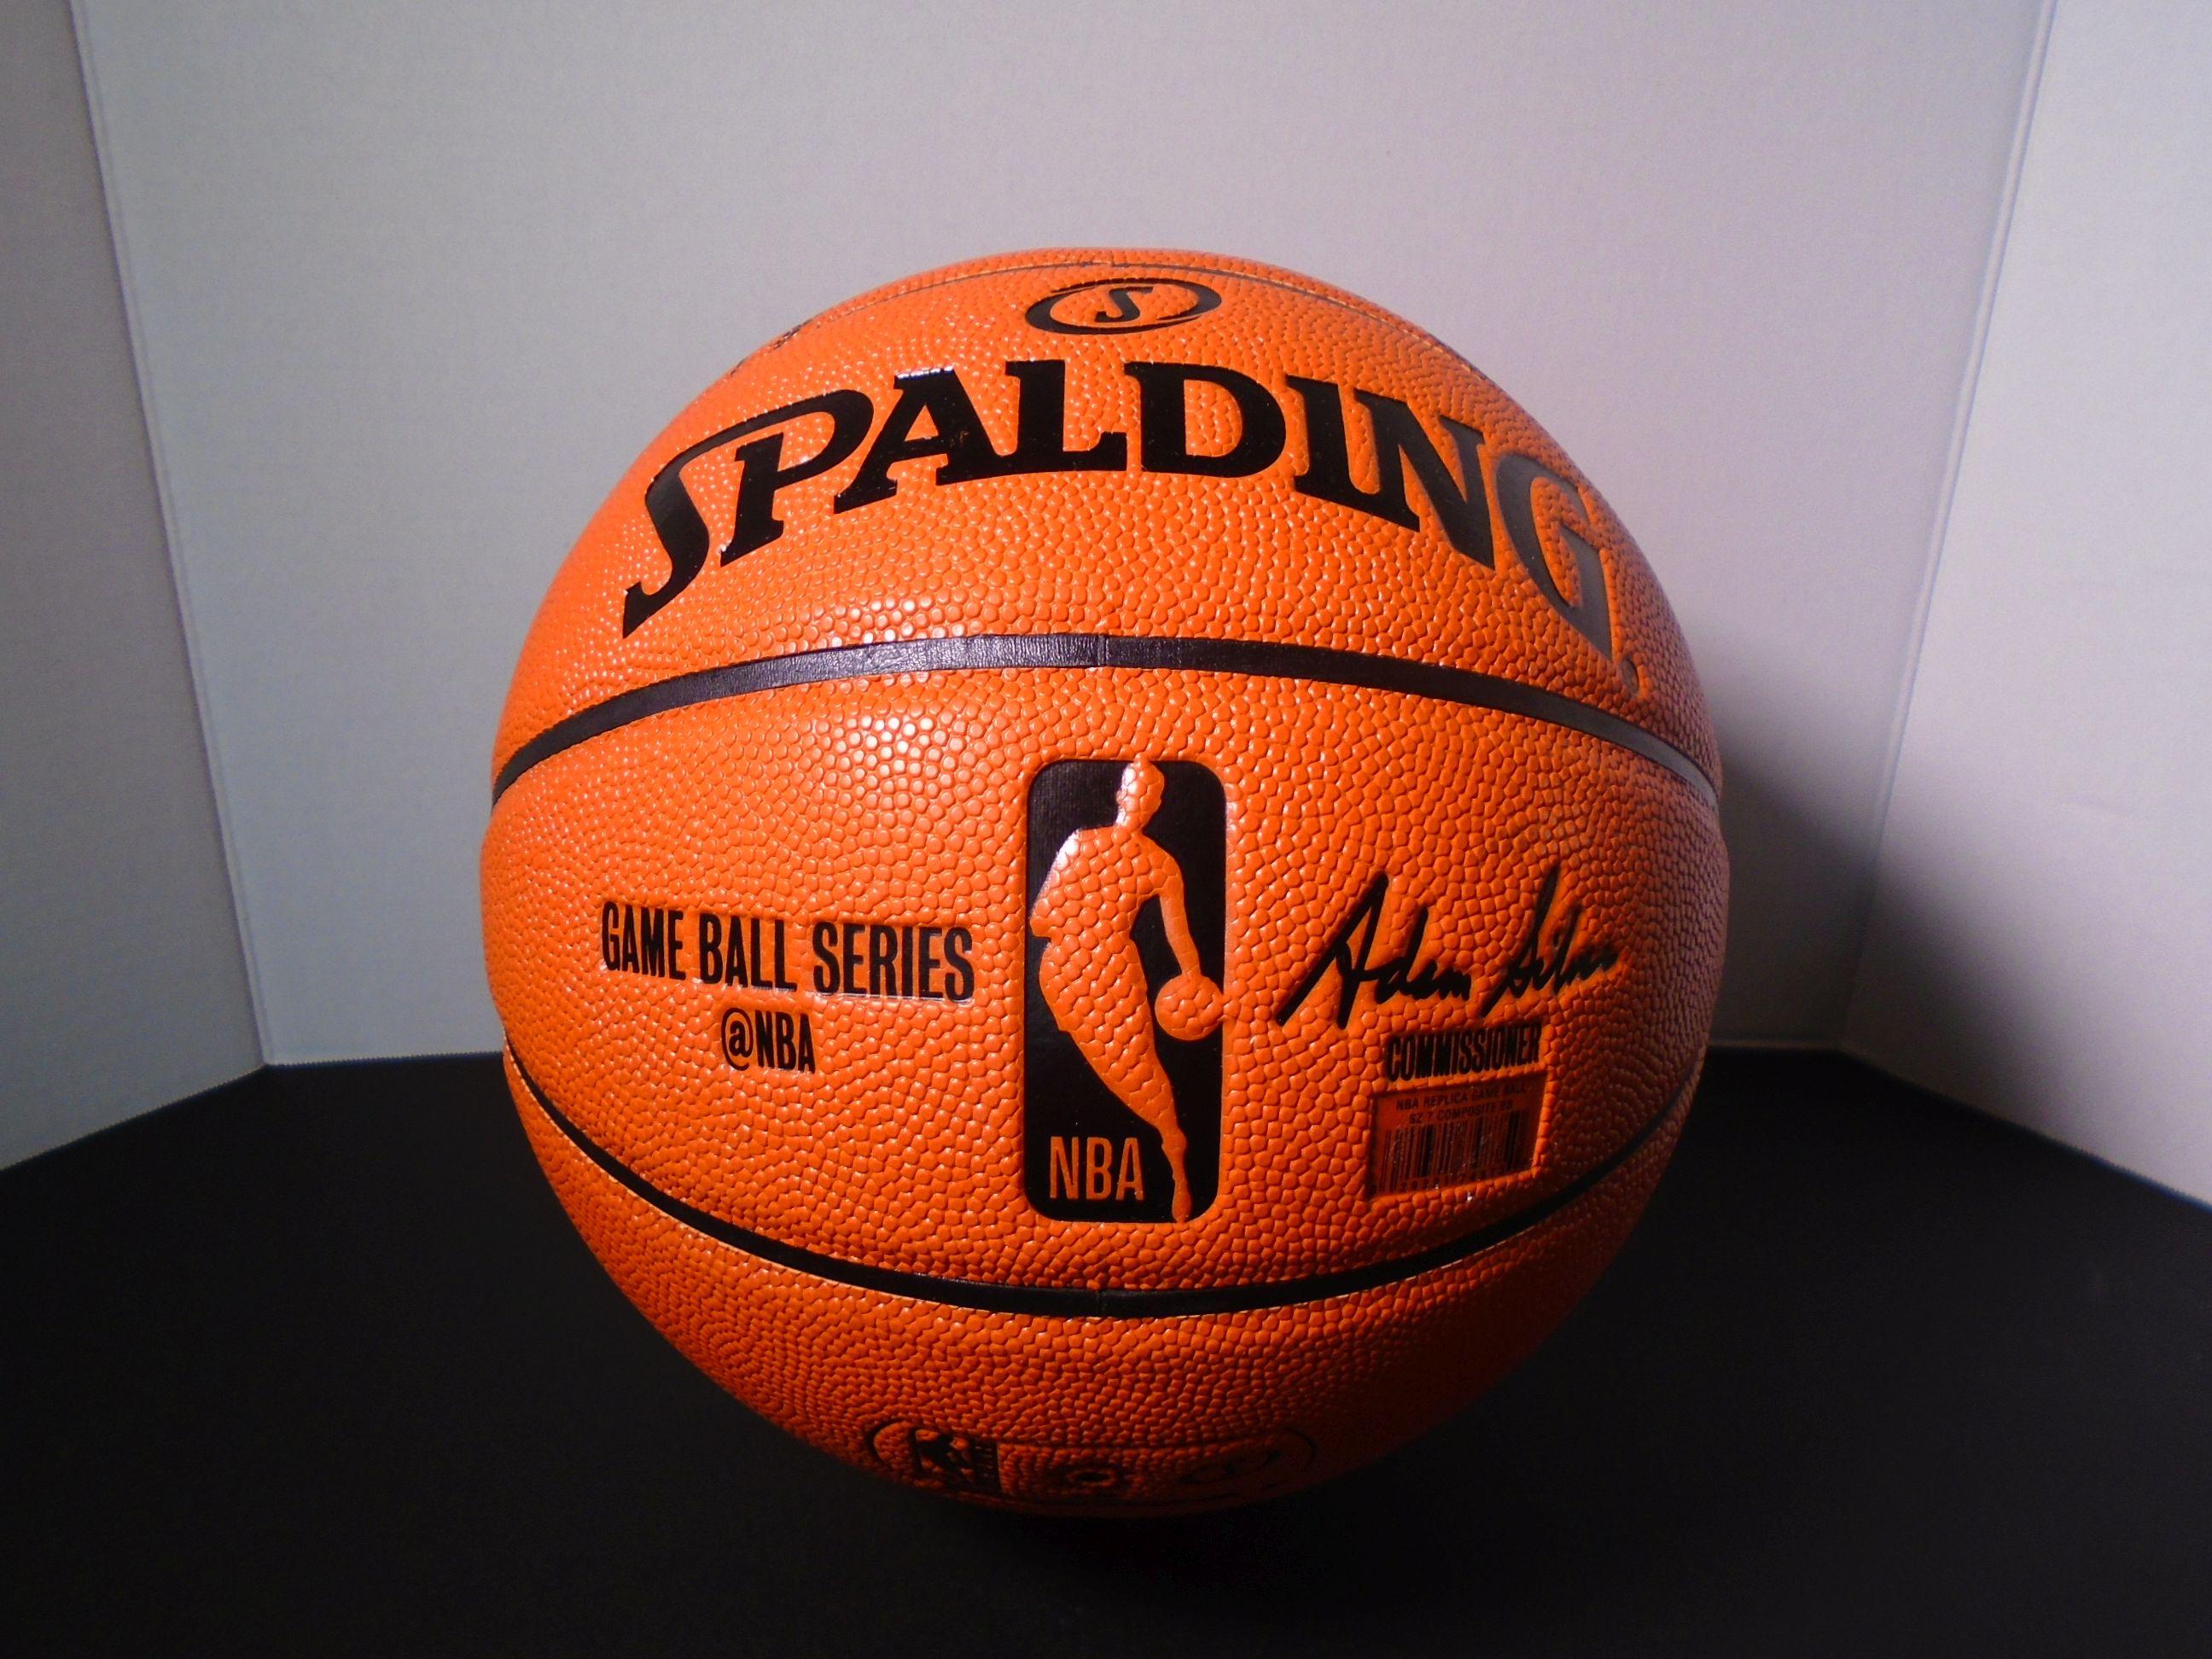 Golden State Warriors "The Big Four" signed full size basketball. Singers include Stephen Curry, Kev